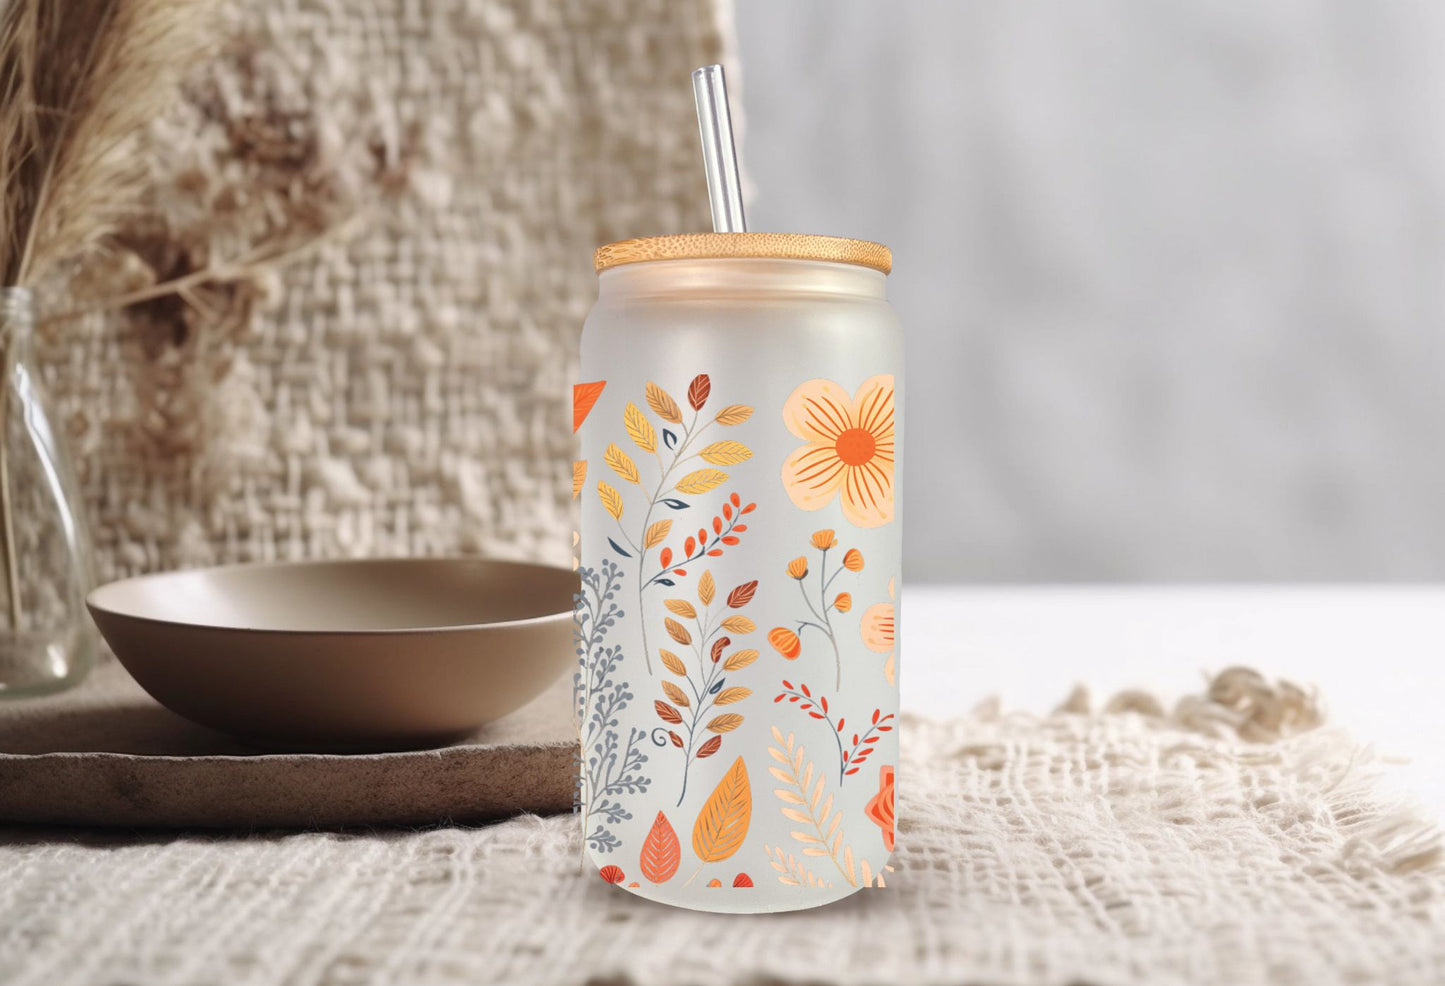 Enjoy your special Fall Beverage in our Fall Flowers designed 16 oz Libbey Style Frosted Glass with Bamboo Lid and straw